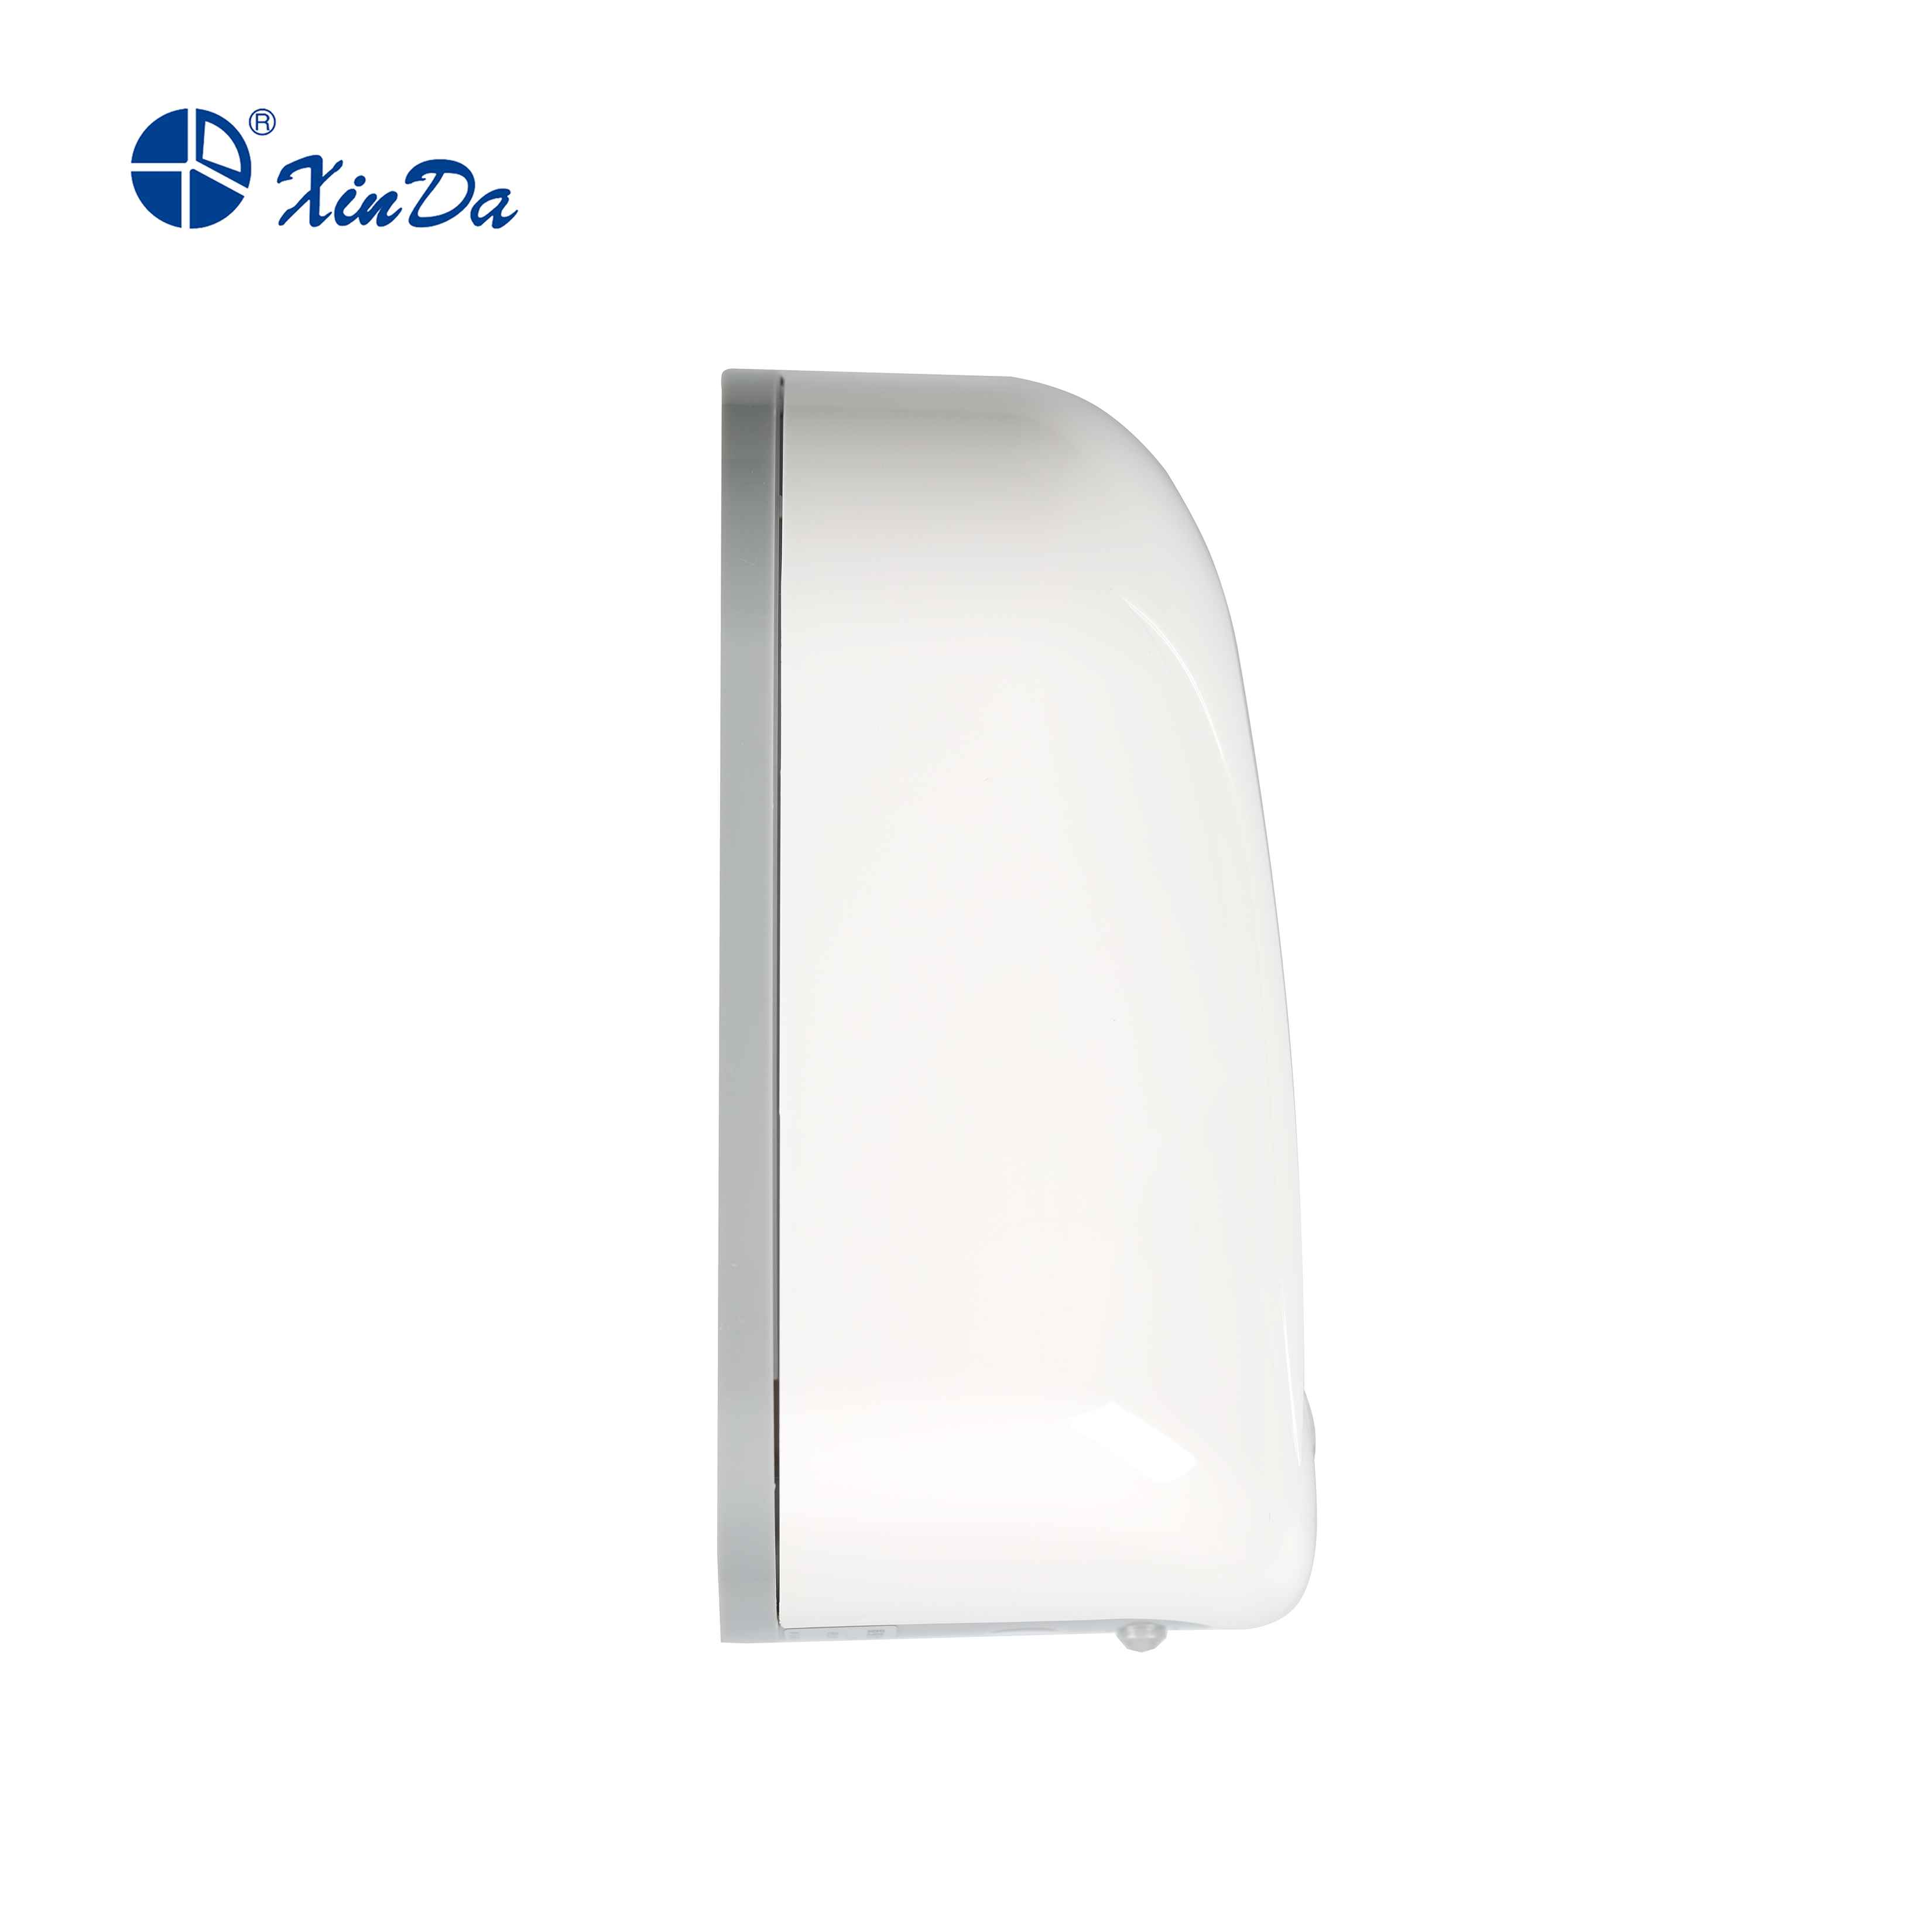 Bathroom Wall Mounted Auto Touchless Liquid Automatic Soap Dispenser